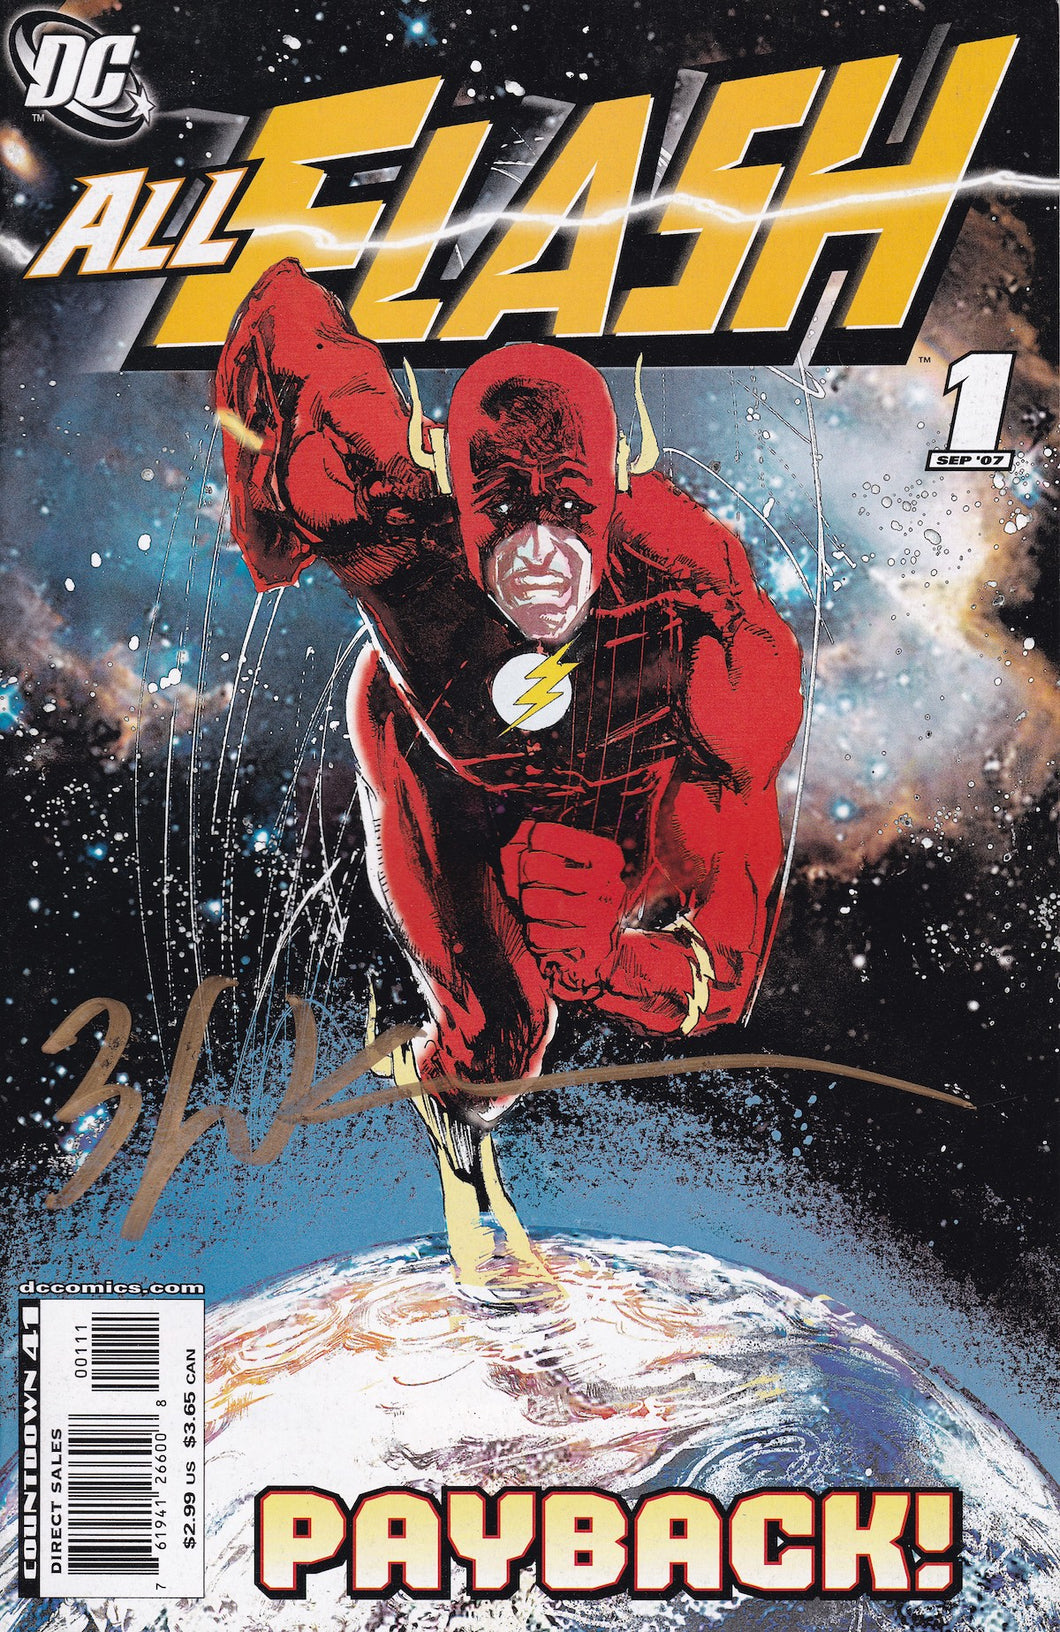 All Flash #1 Signed